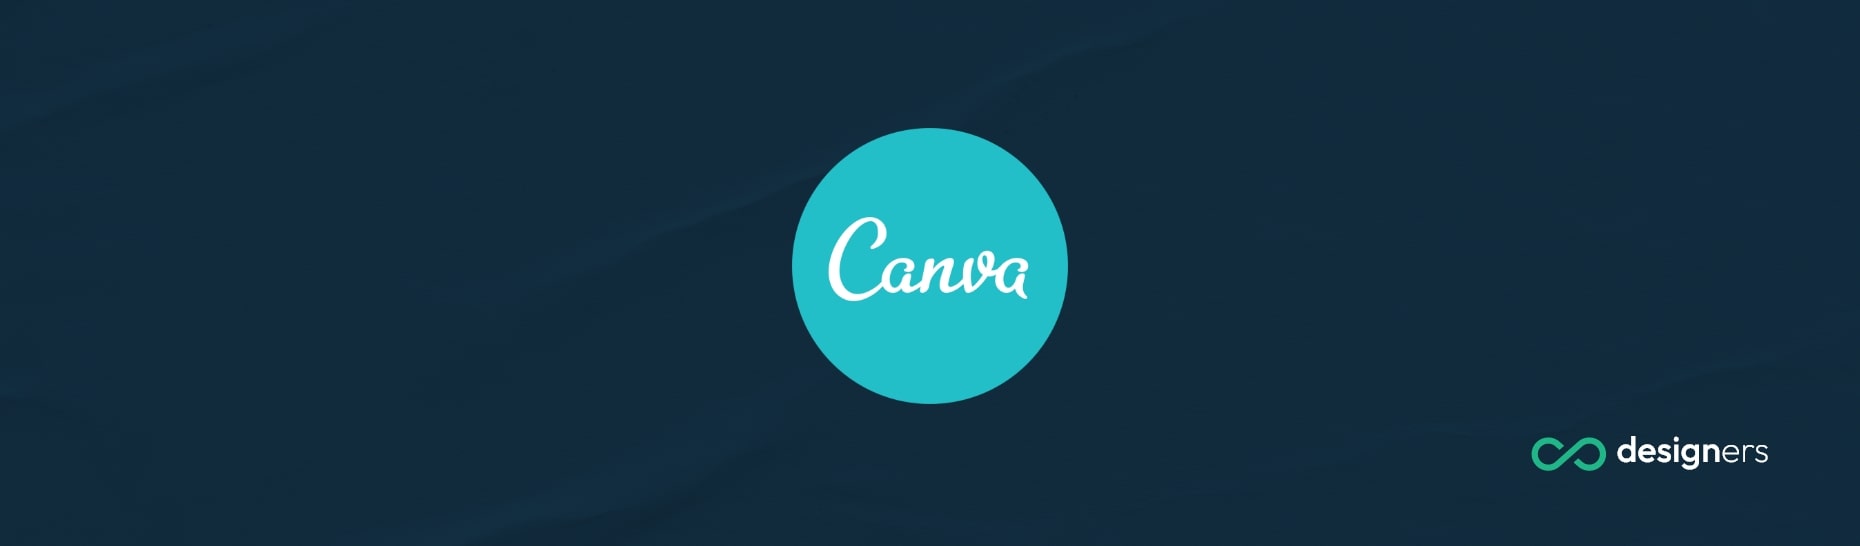 What Font Is Rockwell in Canva?